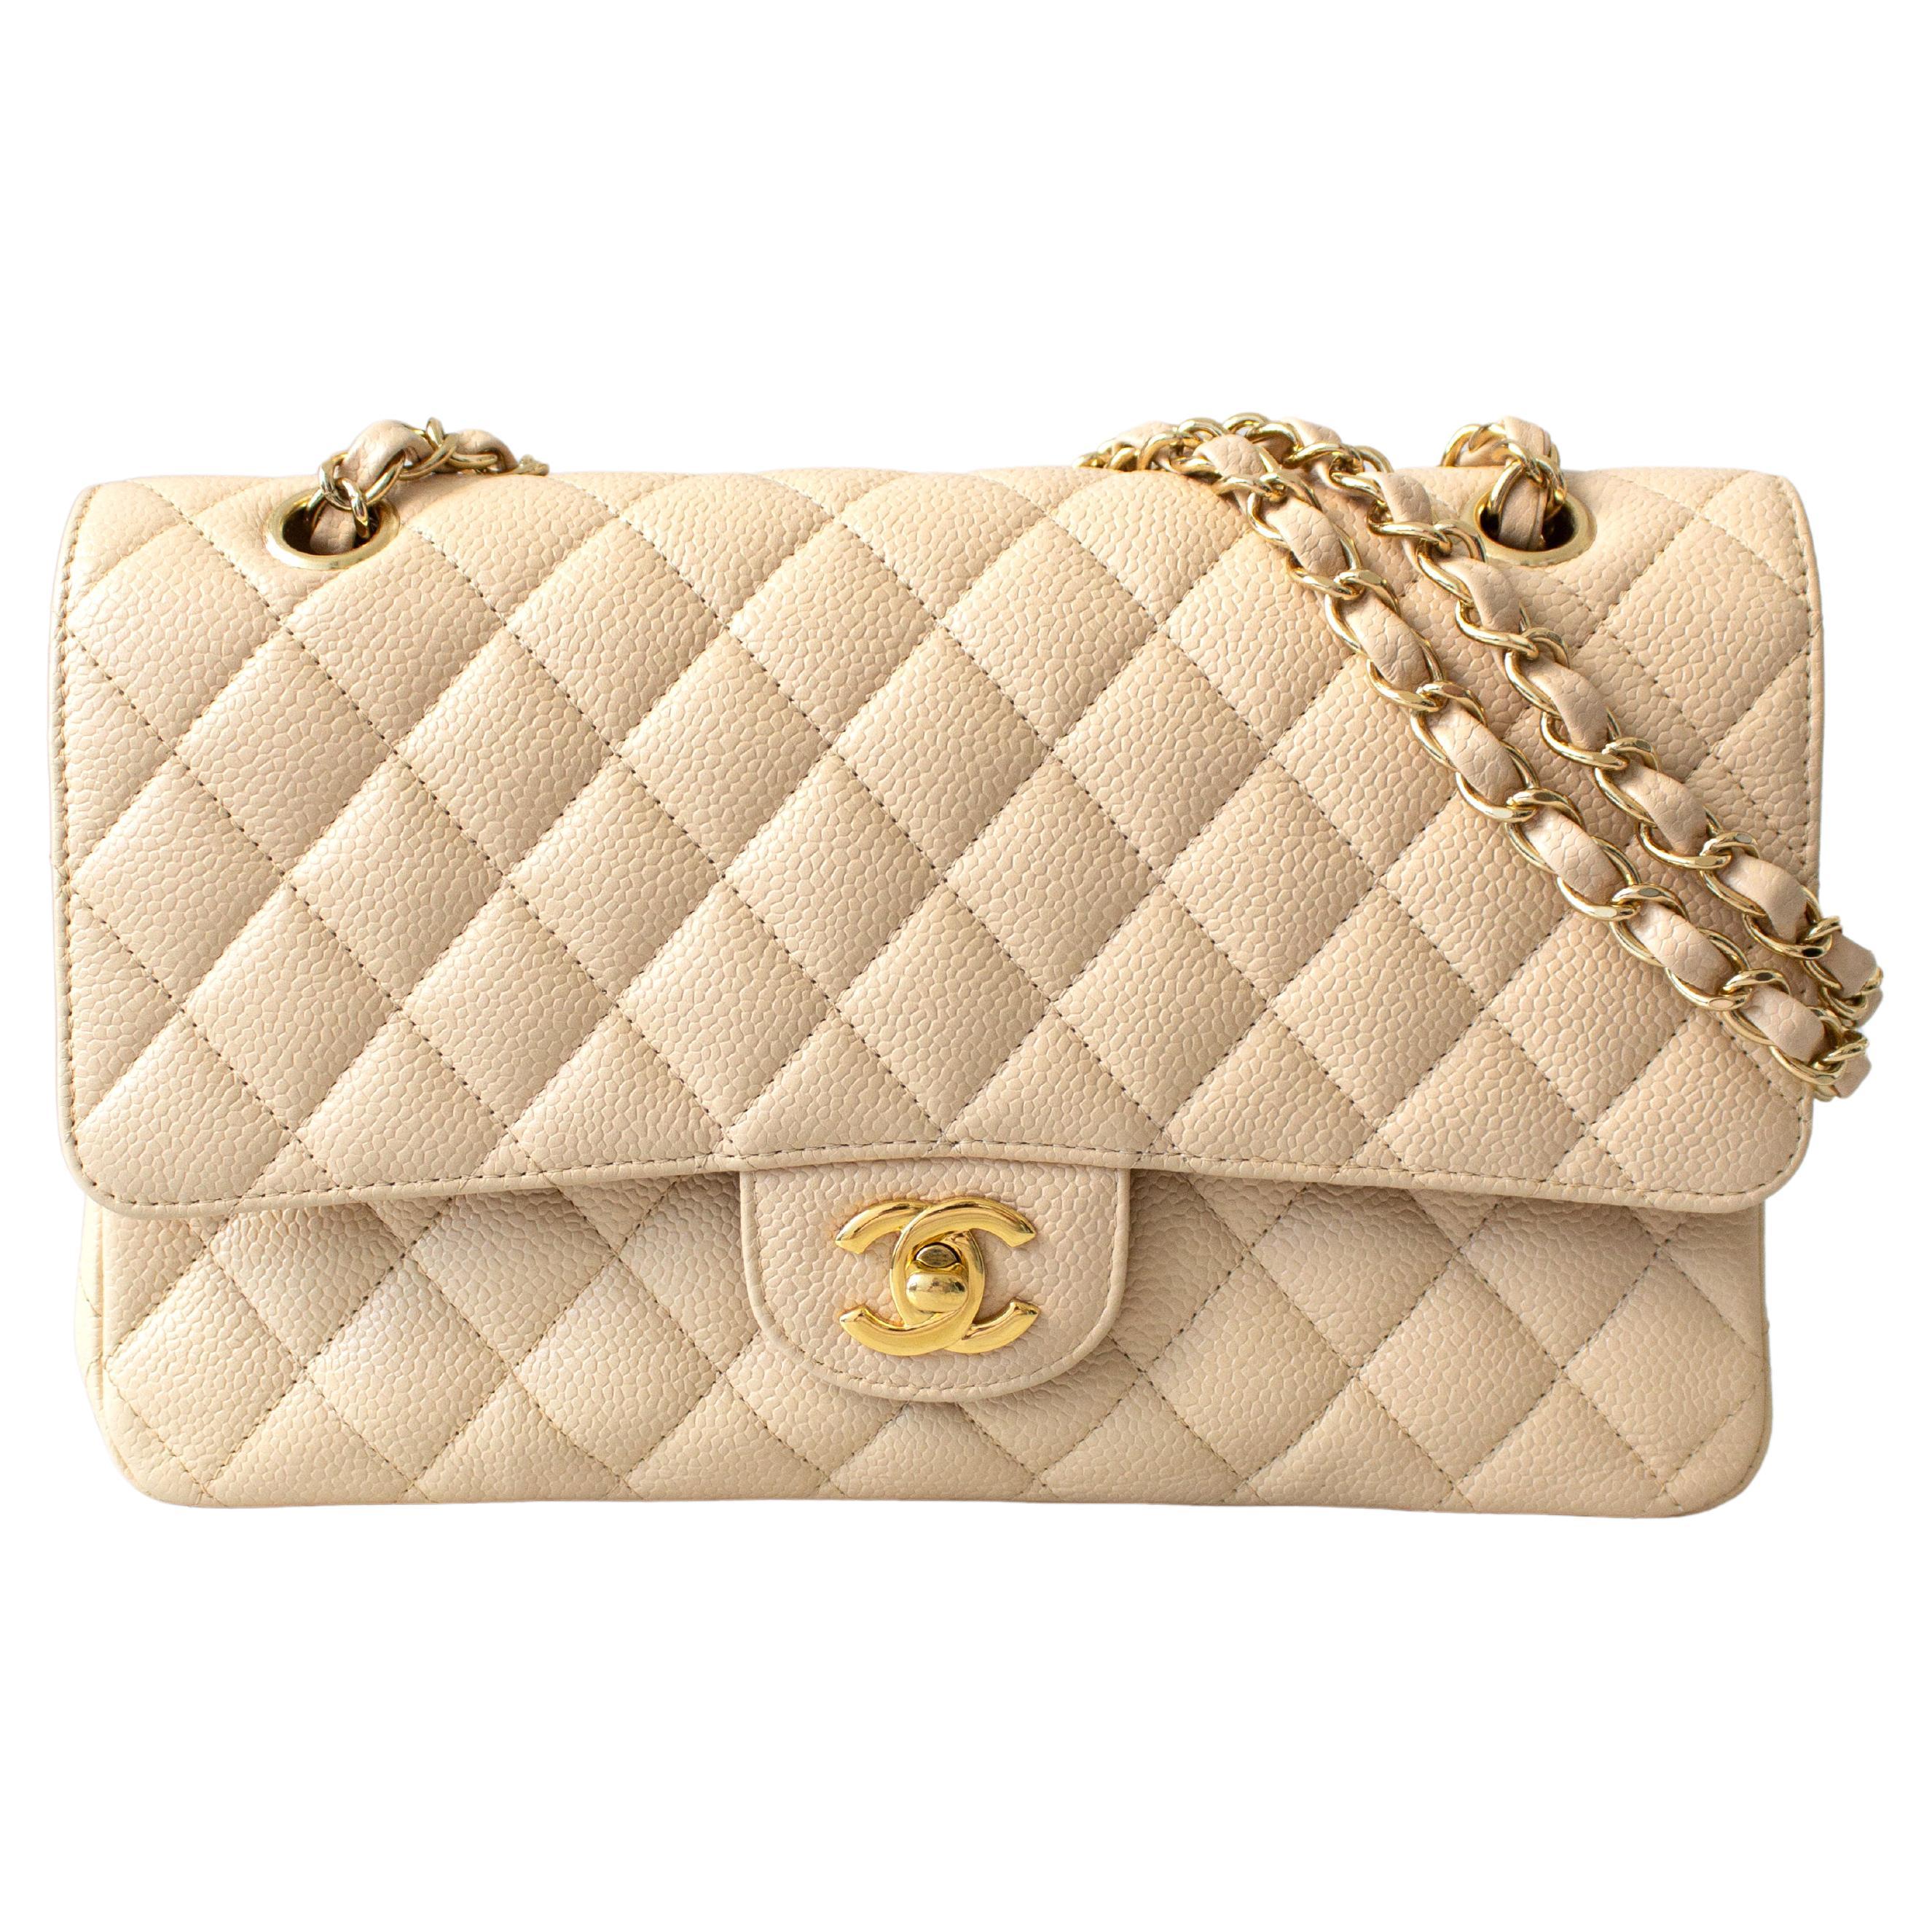 Chanel Ivory Caviar - 4 For Sale on 1stDibs